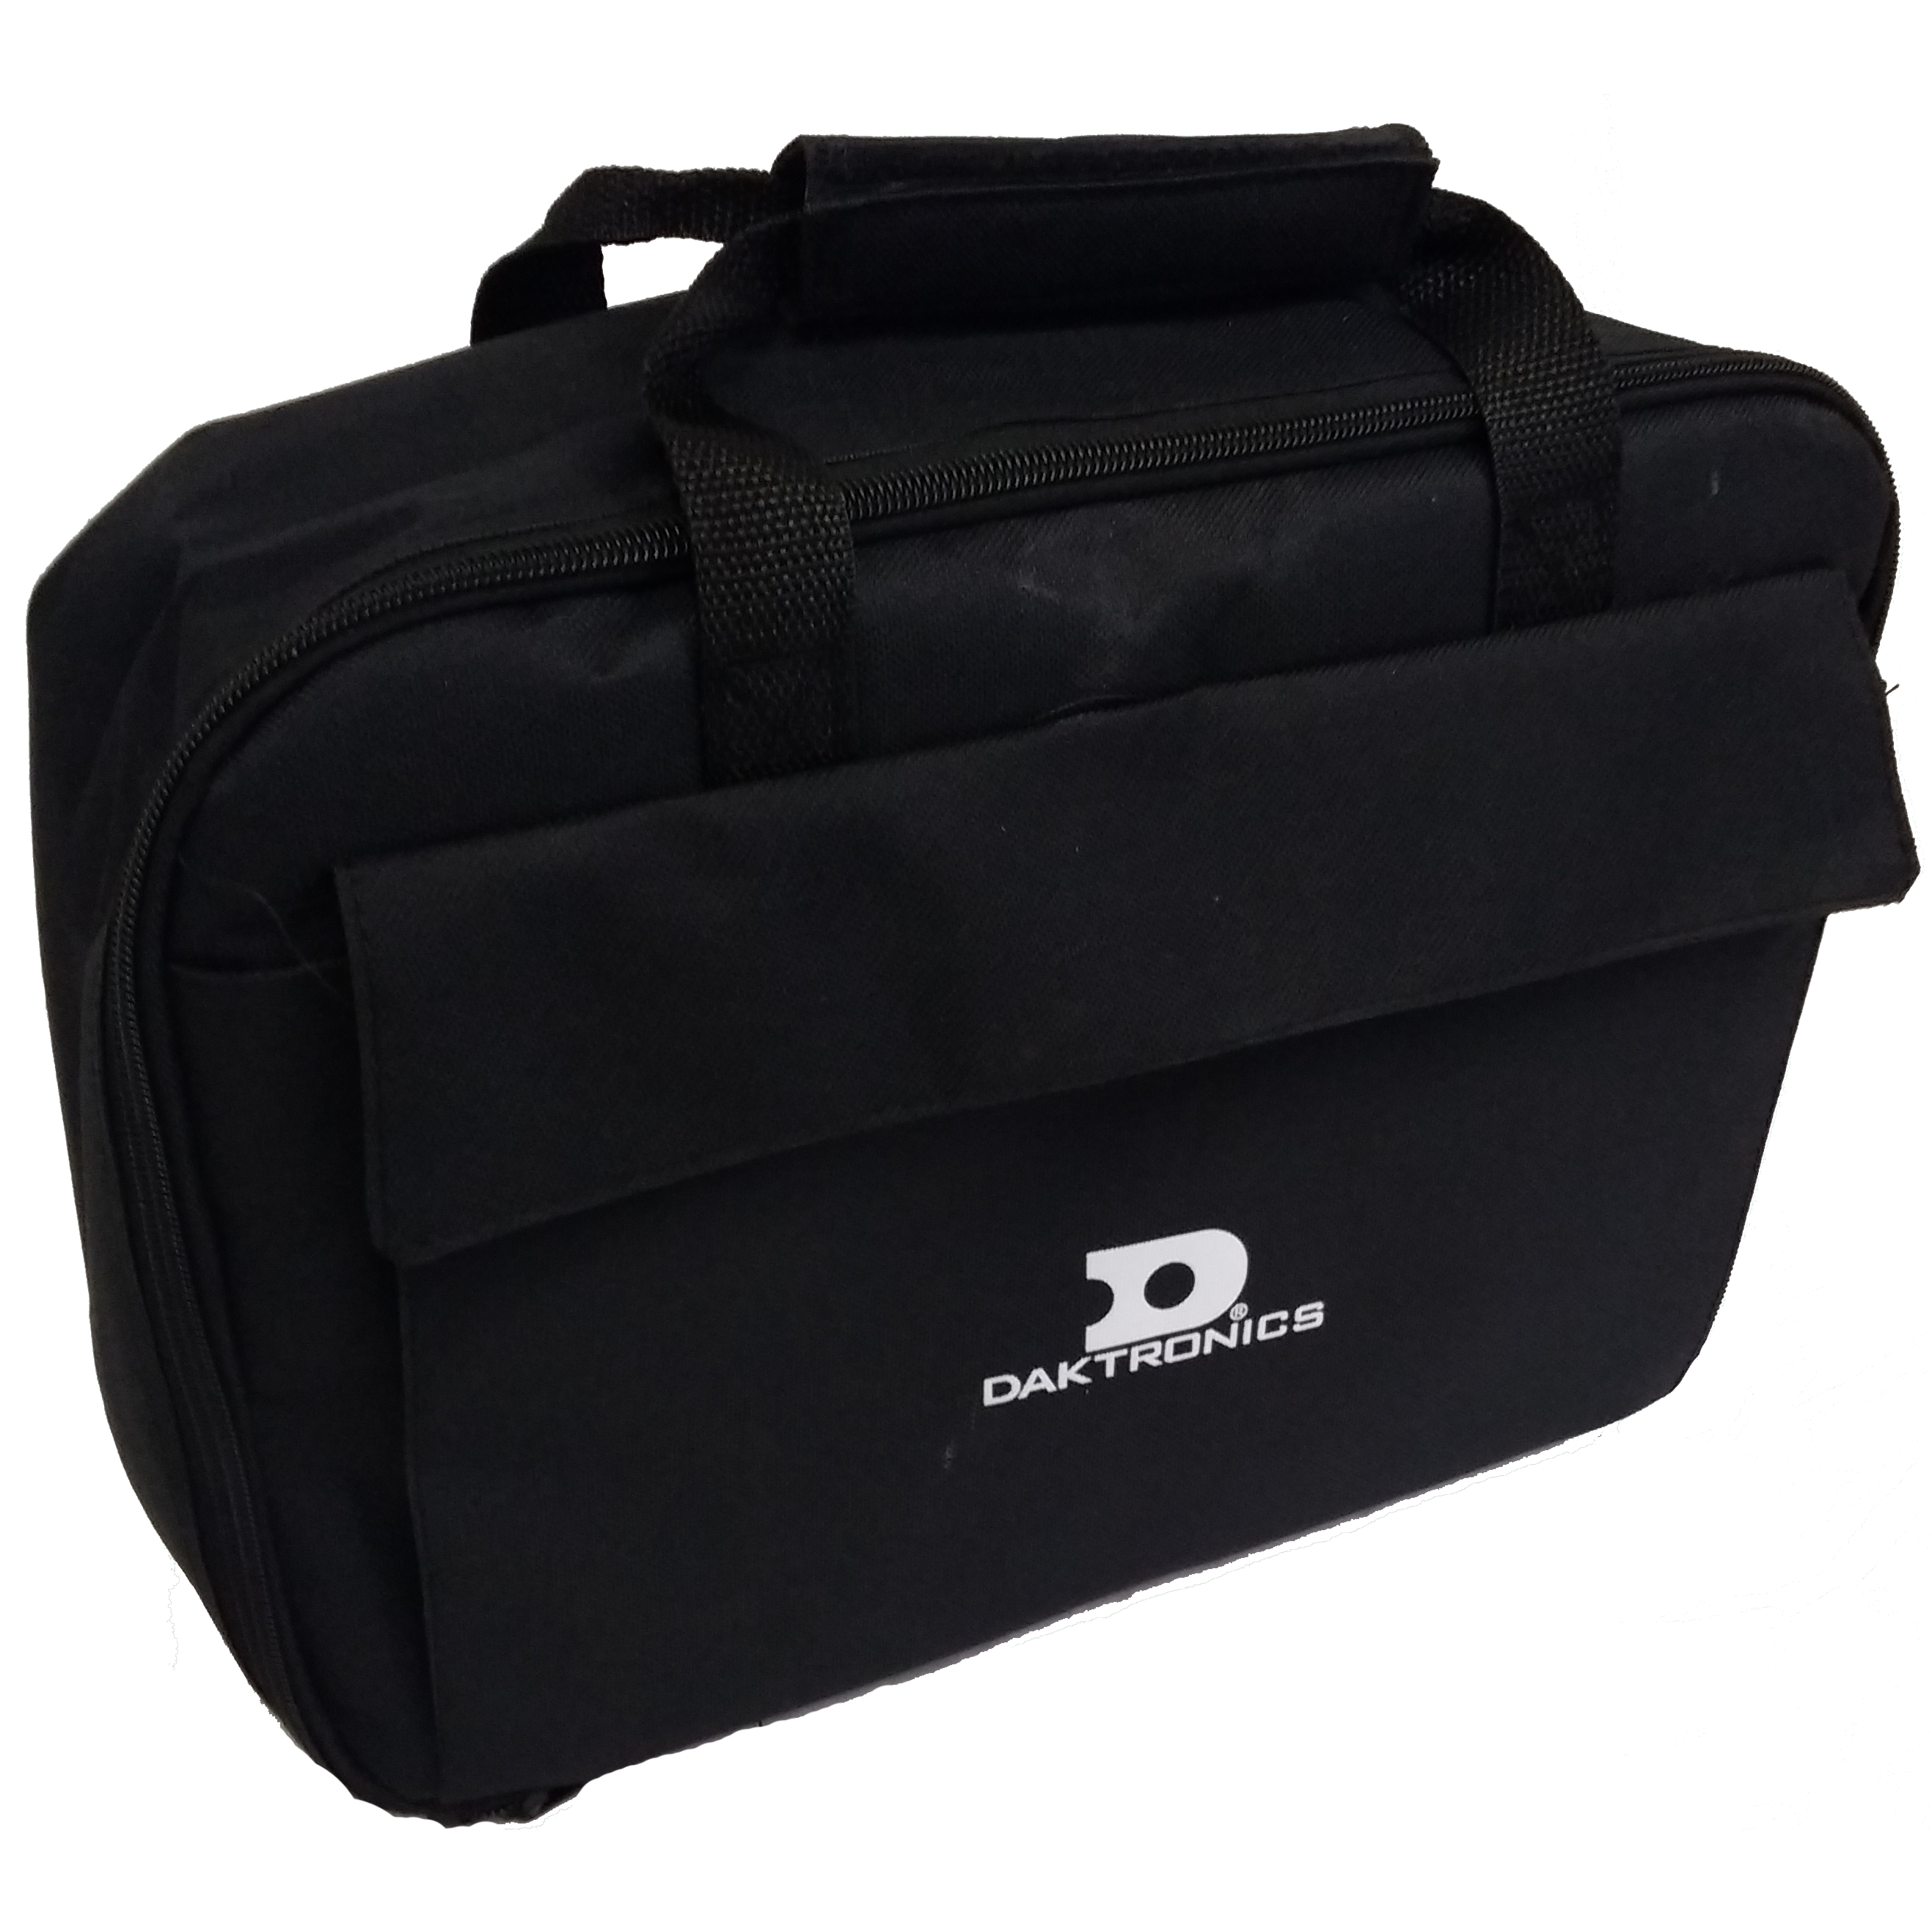 (EN-1810) Daktronics Soft Carrying Case for All Sport 1600 Controllers